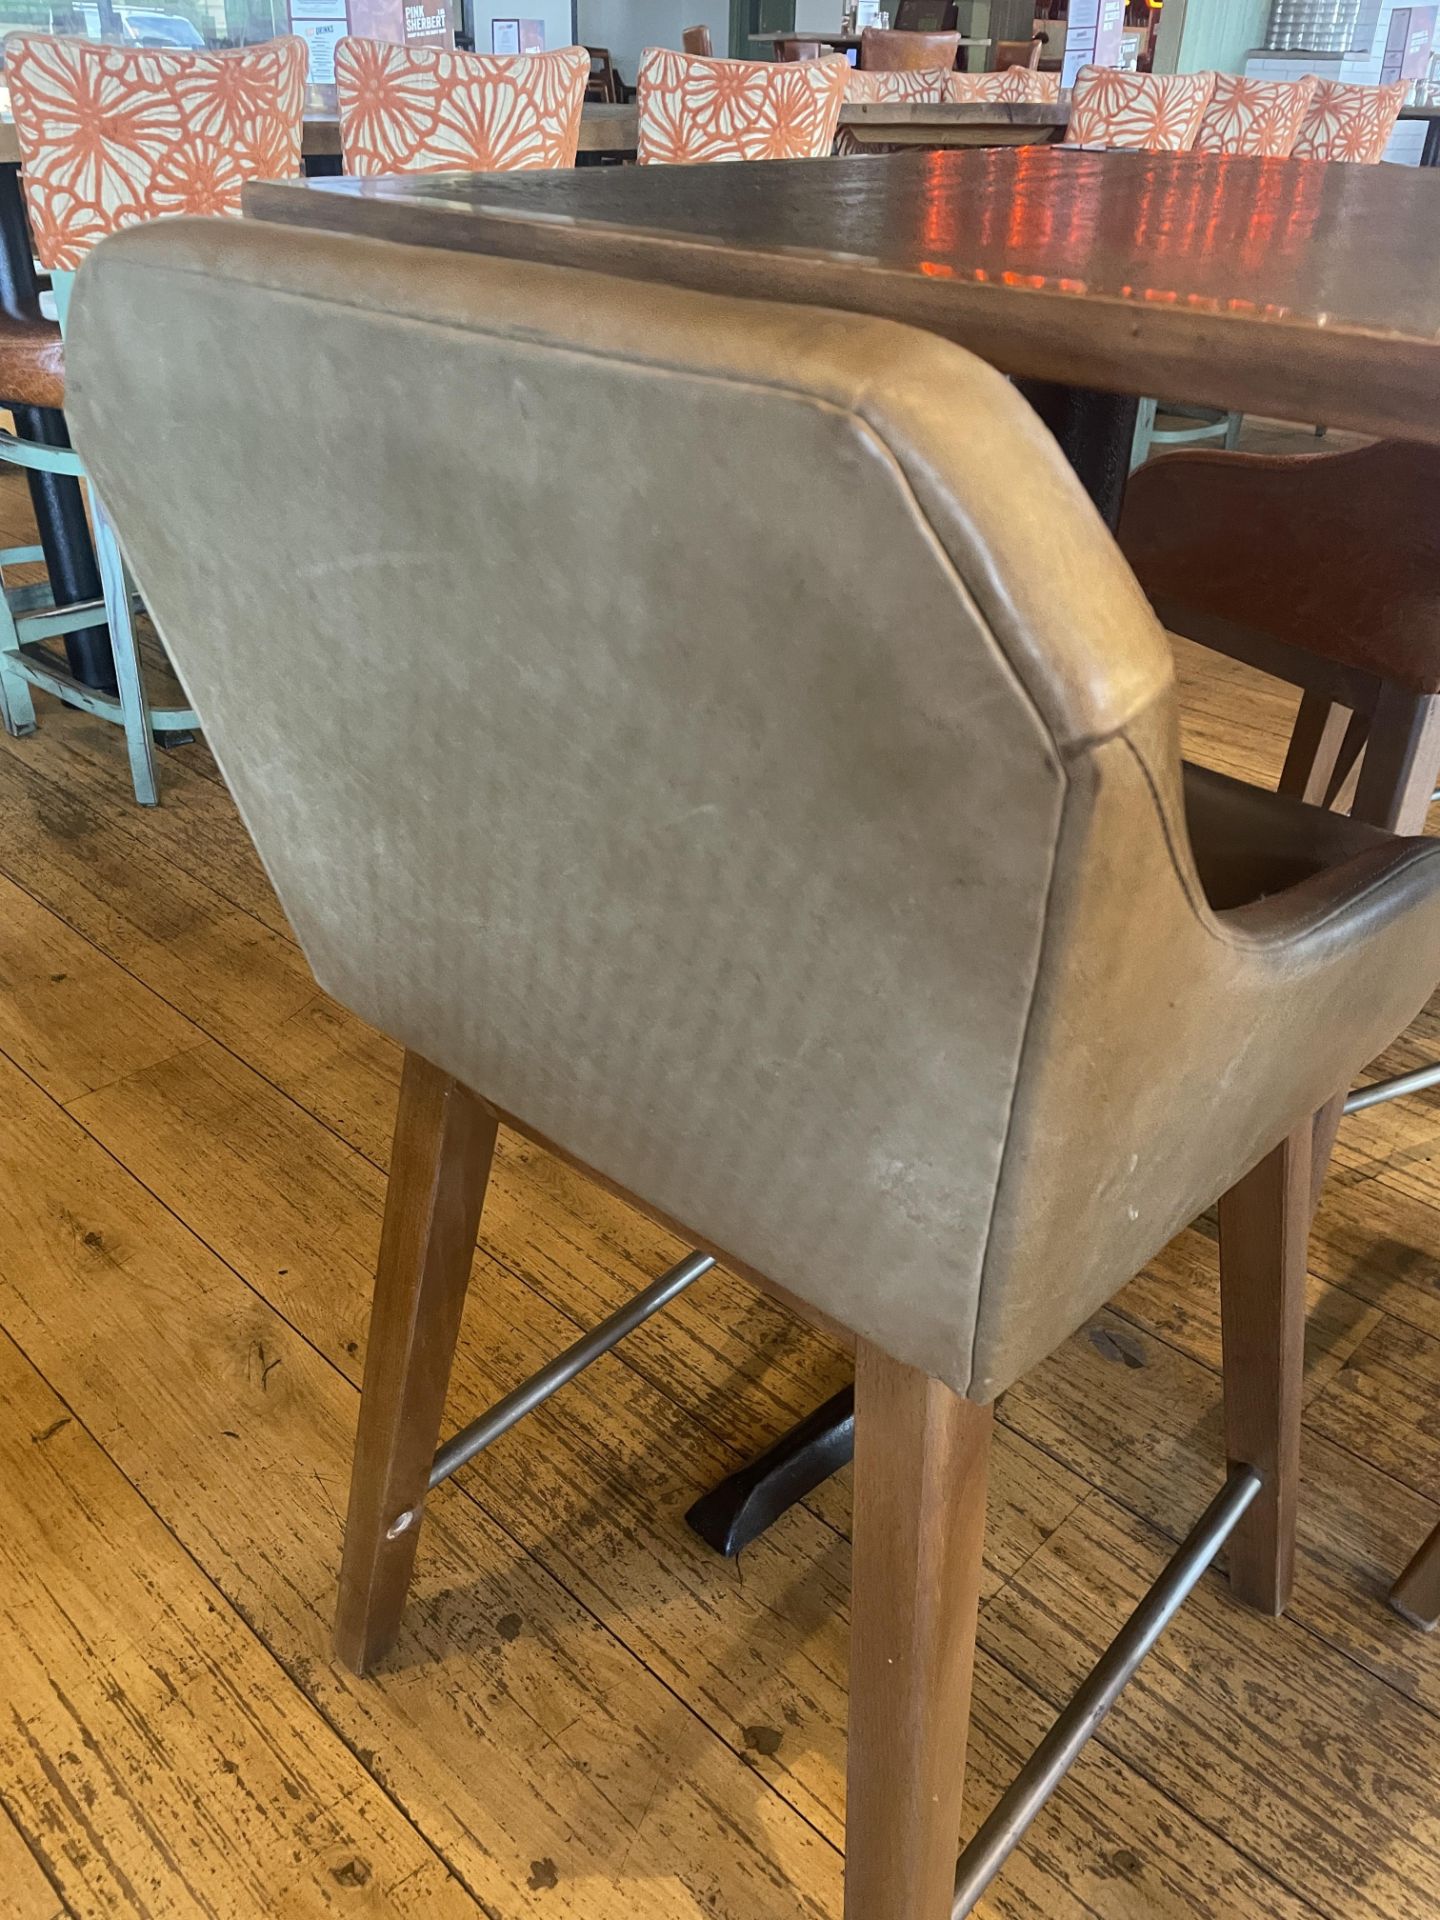 4 x Counter Height Commercial Restaurant Stools Featuring Padded Seats With Sloping Armrests,